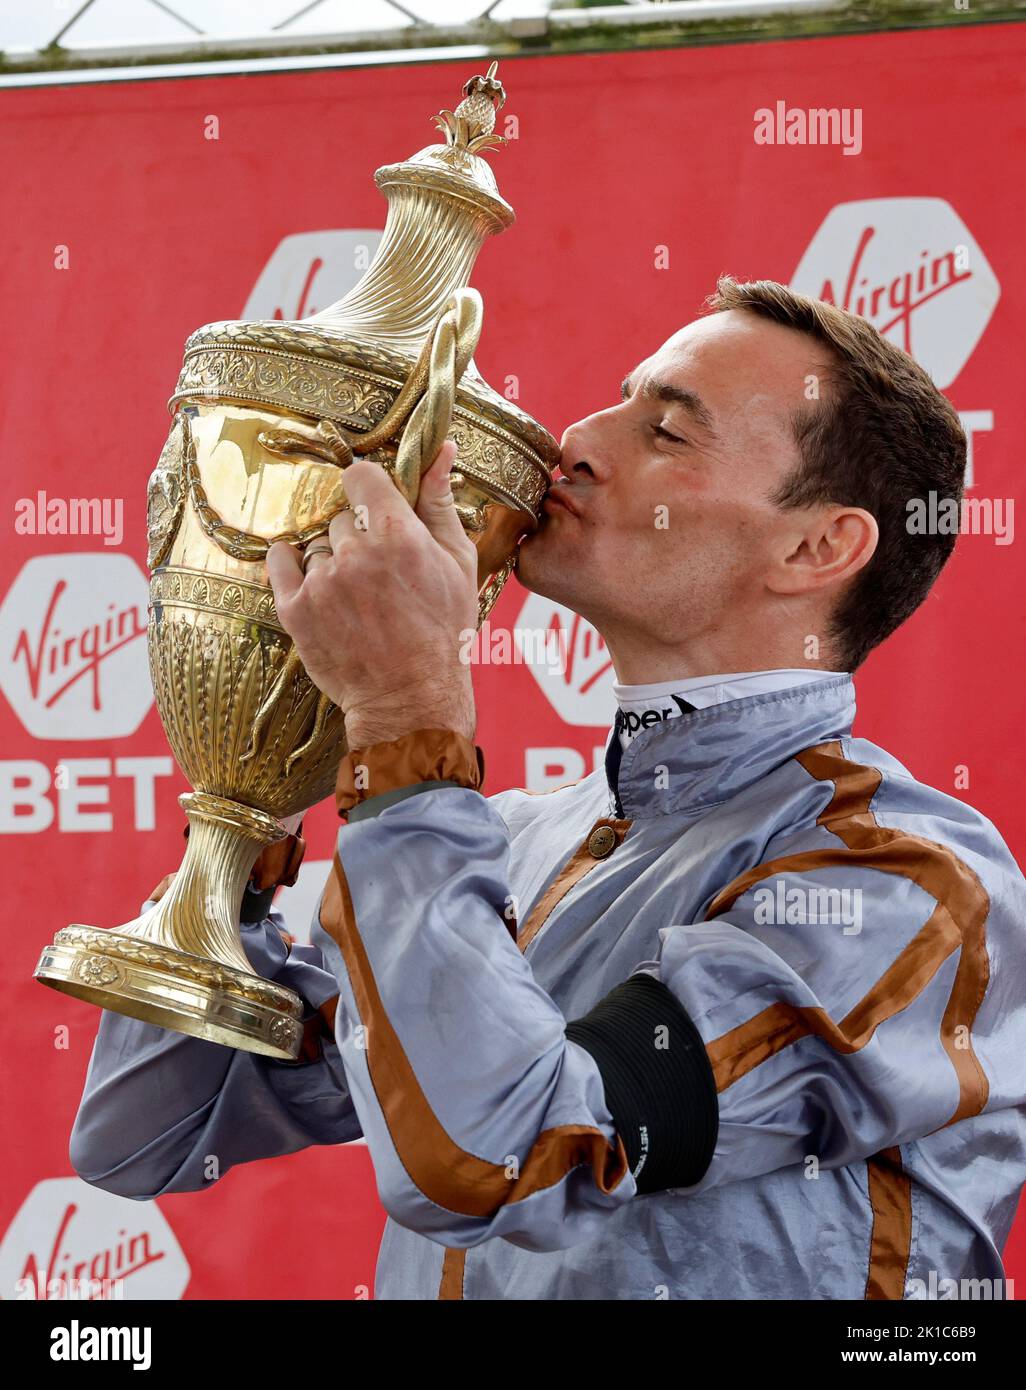 Jockey Daniel Tudhope with the trophy after winning the Virgin Bet Ayr Gold Cup Handicap on Summerghand during the Virgin Bet Ayr Gold Cup day at Ayr Racecourse, Ayr. Picture date: Saturday September 17, 2022. Stock Photo